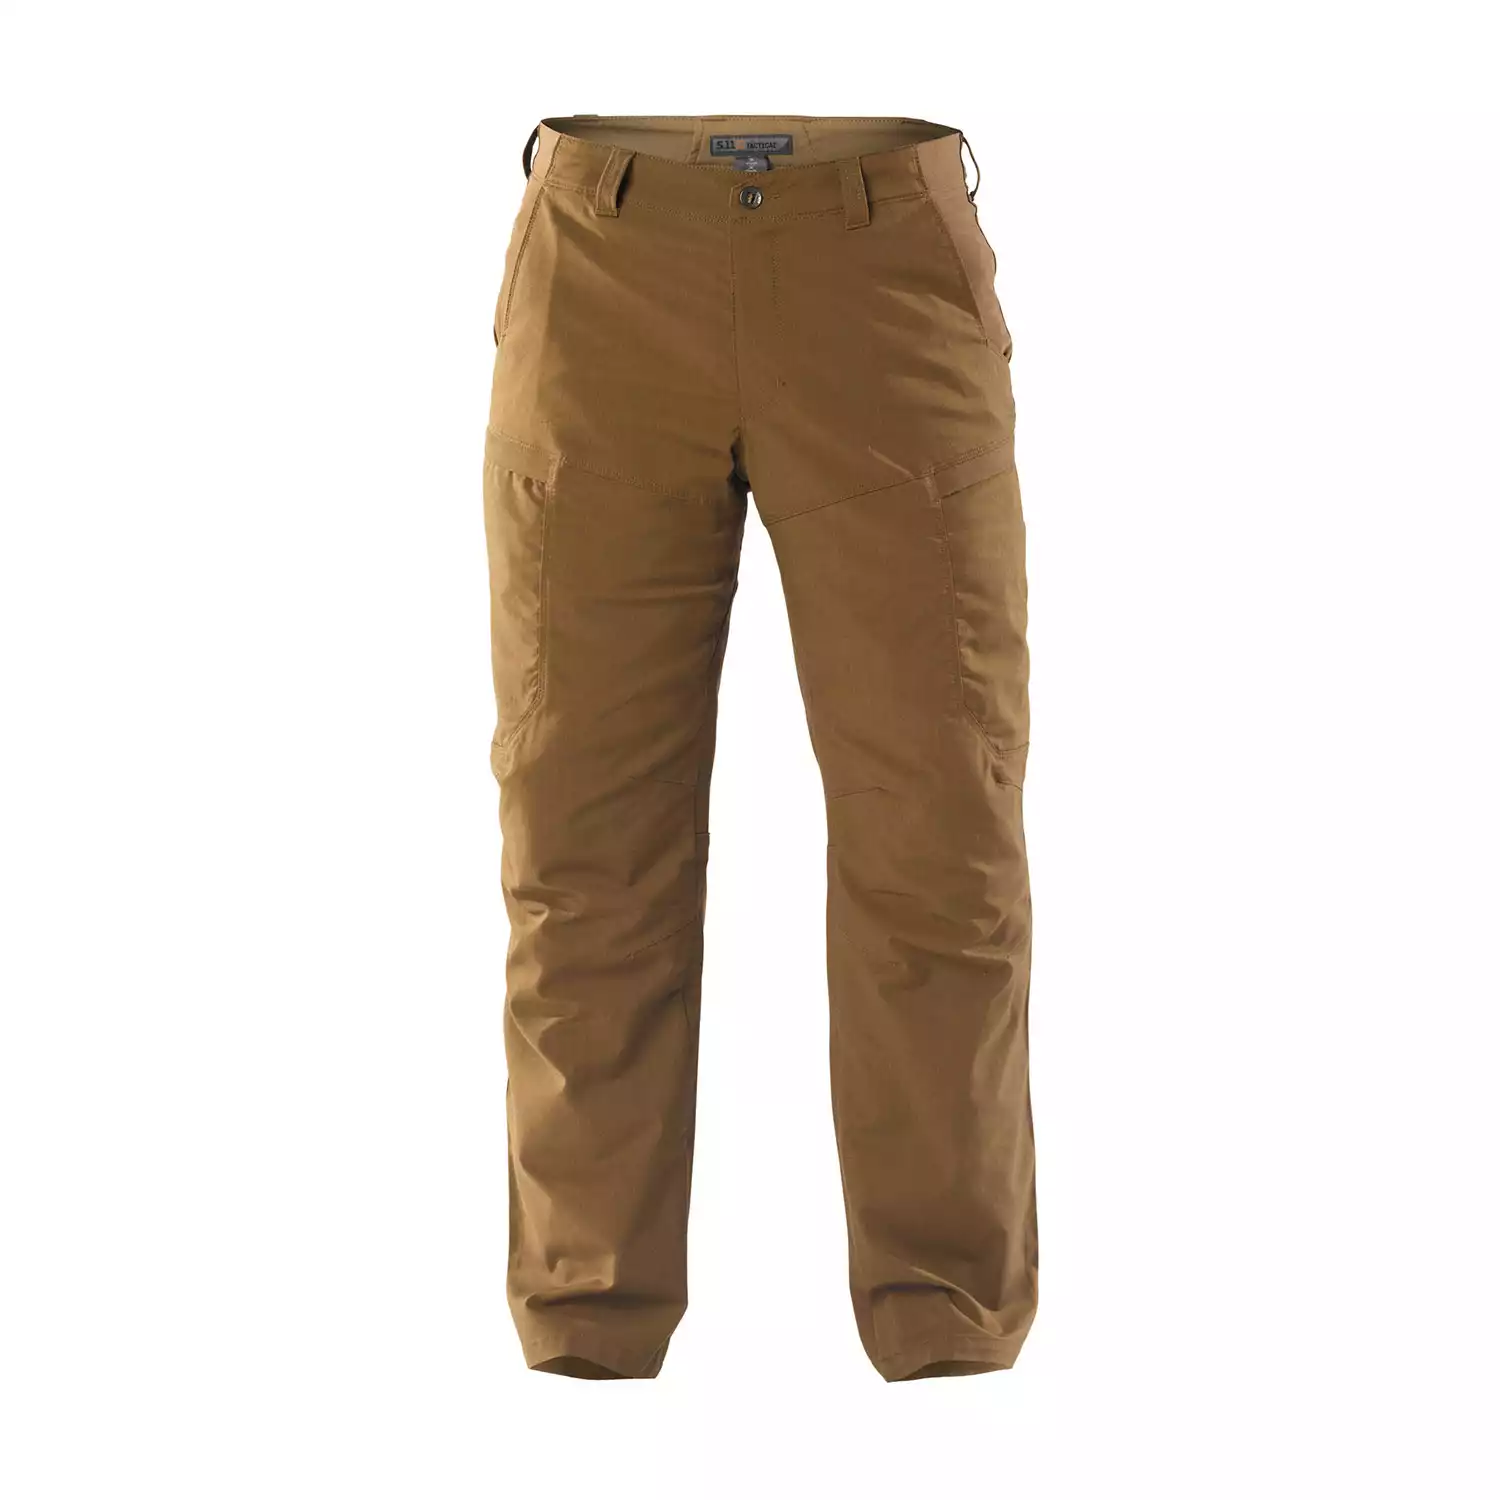 5.11 Tactical Apex Pants by Ripstop